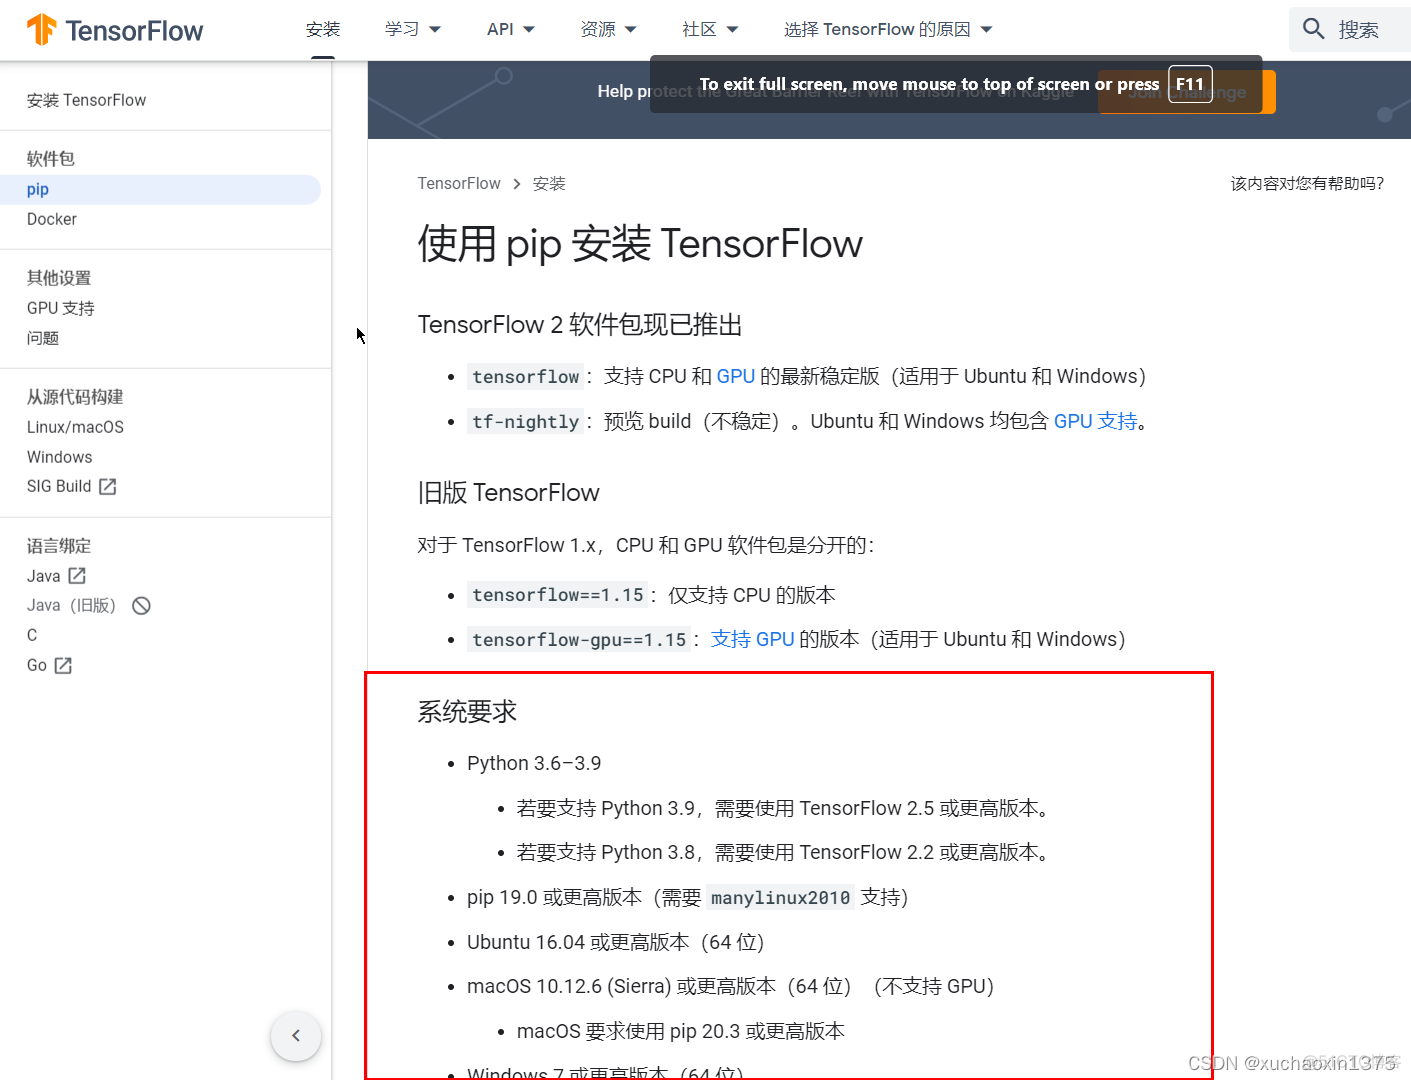 python_tensorflow安装失败:ERROR: Could not find a version that satisfies the requirement tensorflow_深度学习_04